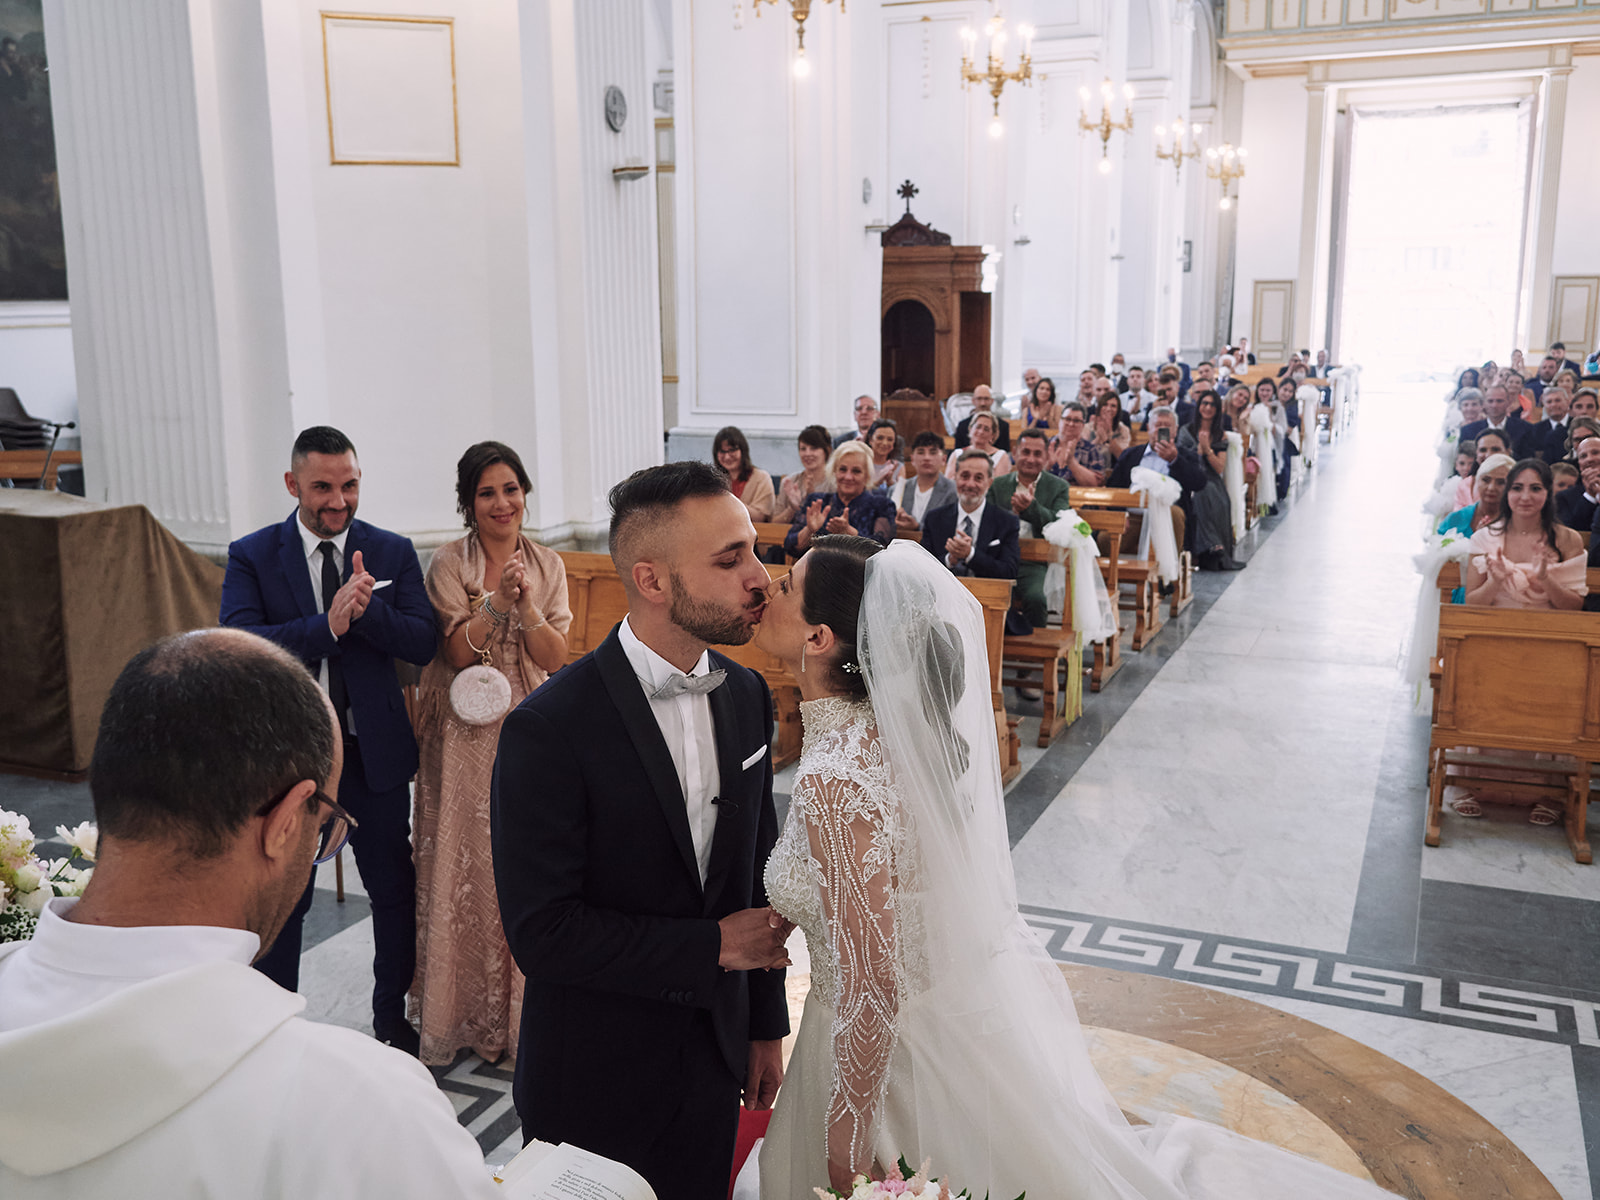 Marianna and Mattia exchanging vows at Chiesa Madre in Gela